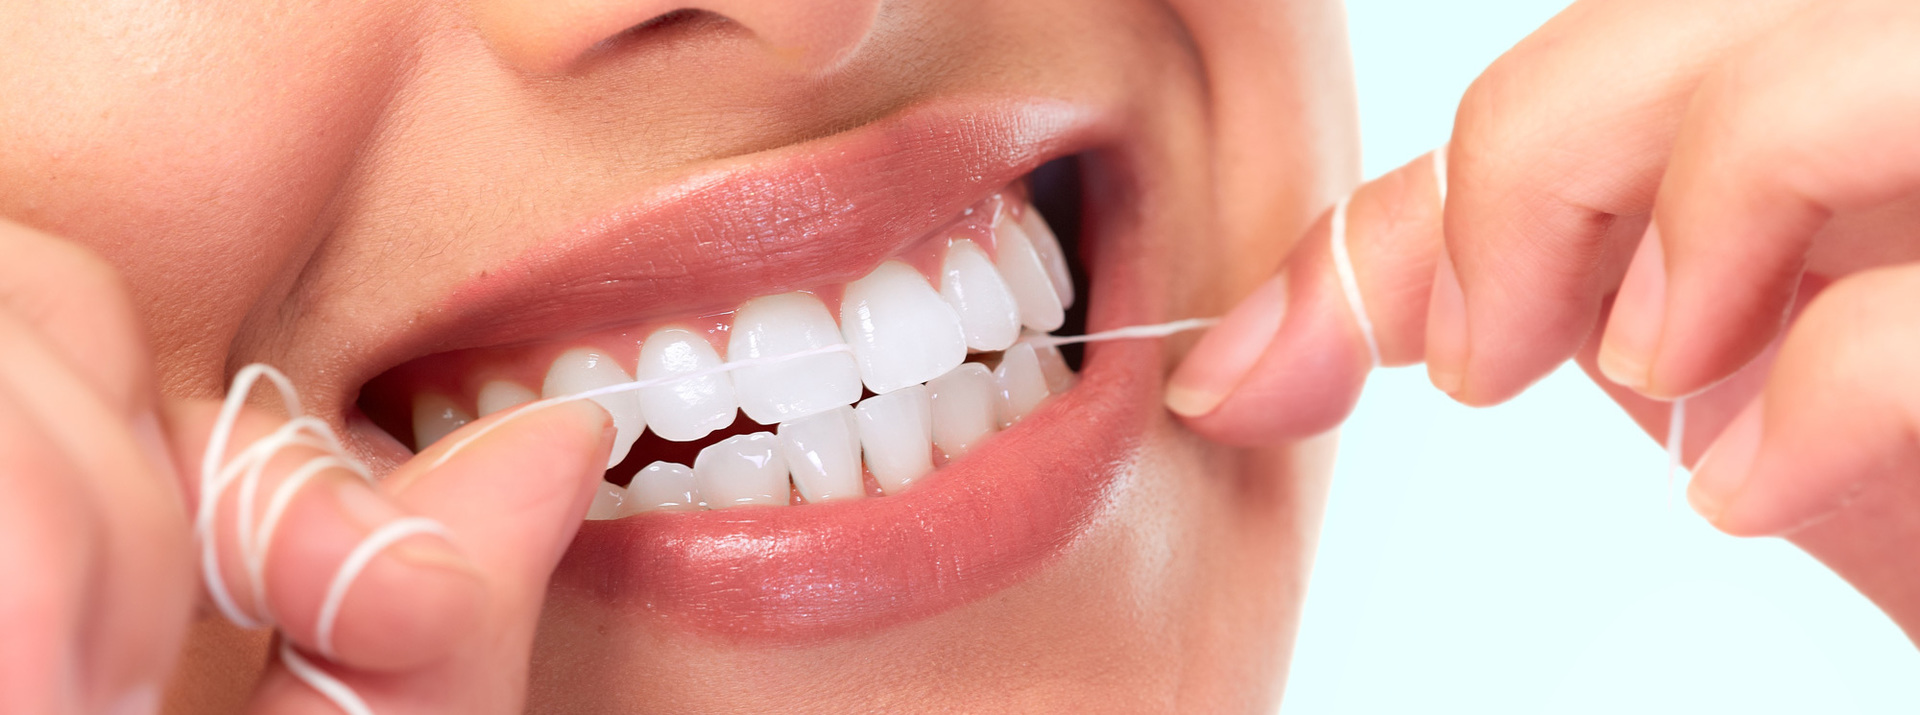 Dental Care Tips That All Ages Can Use 2